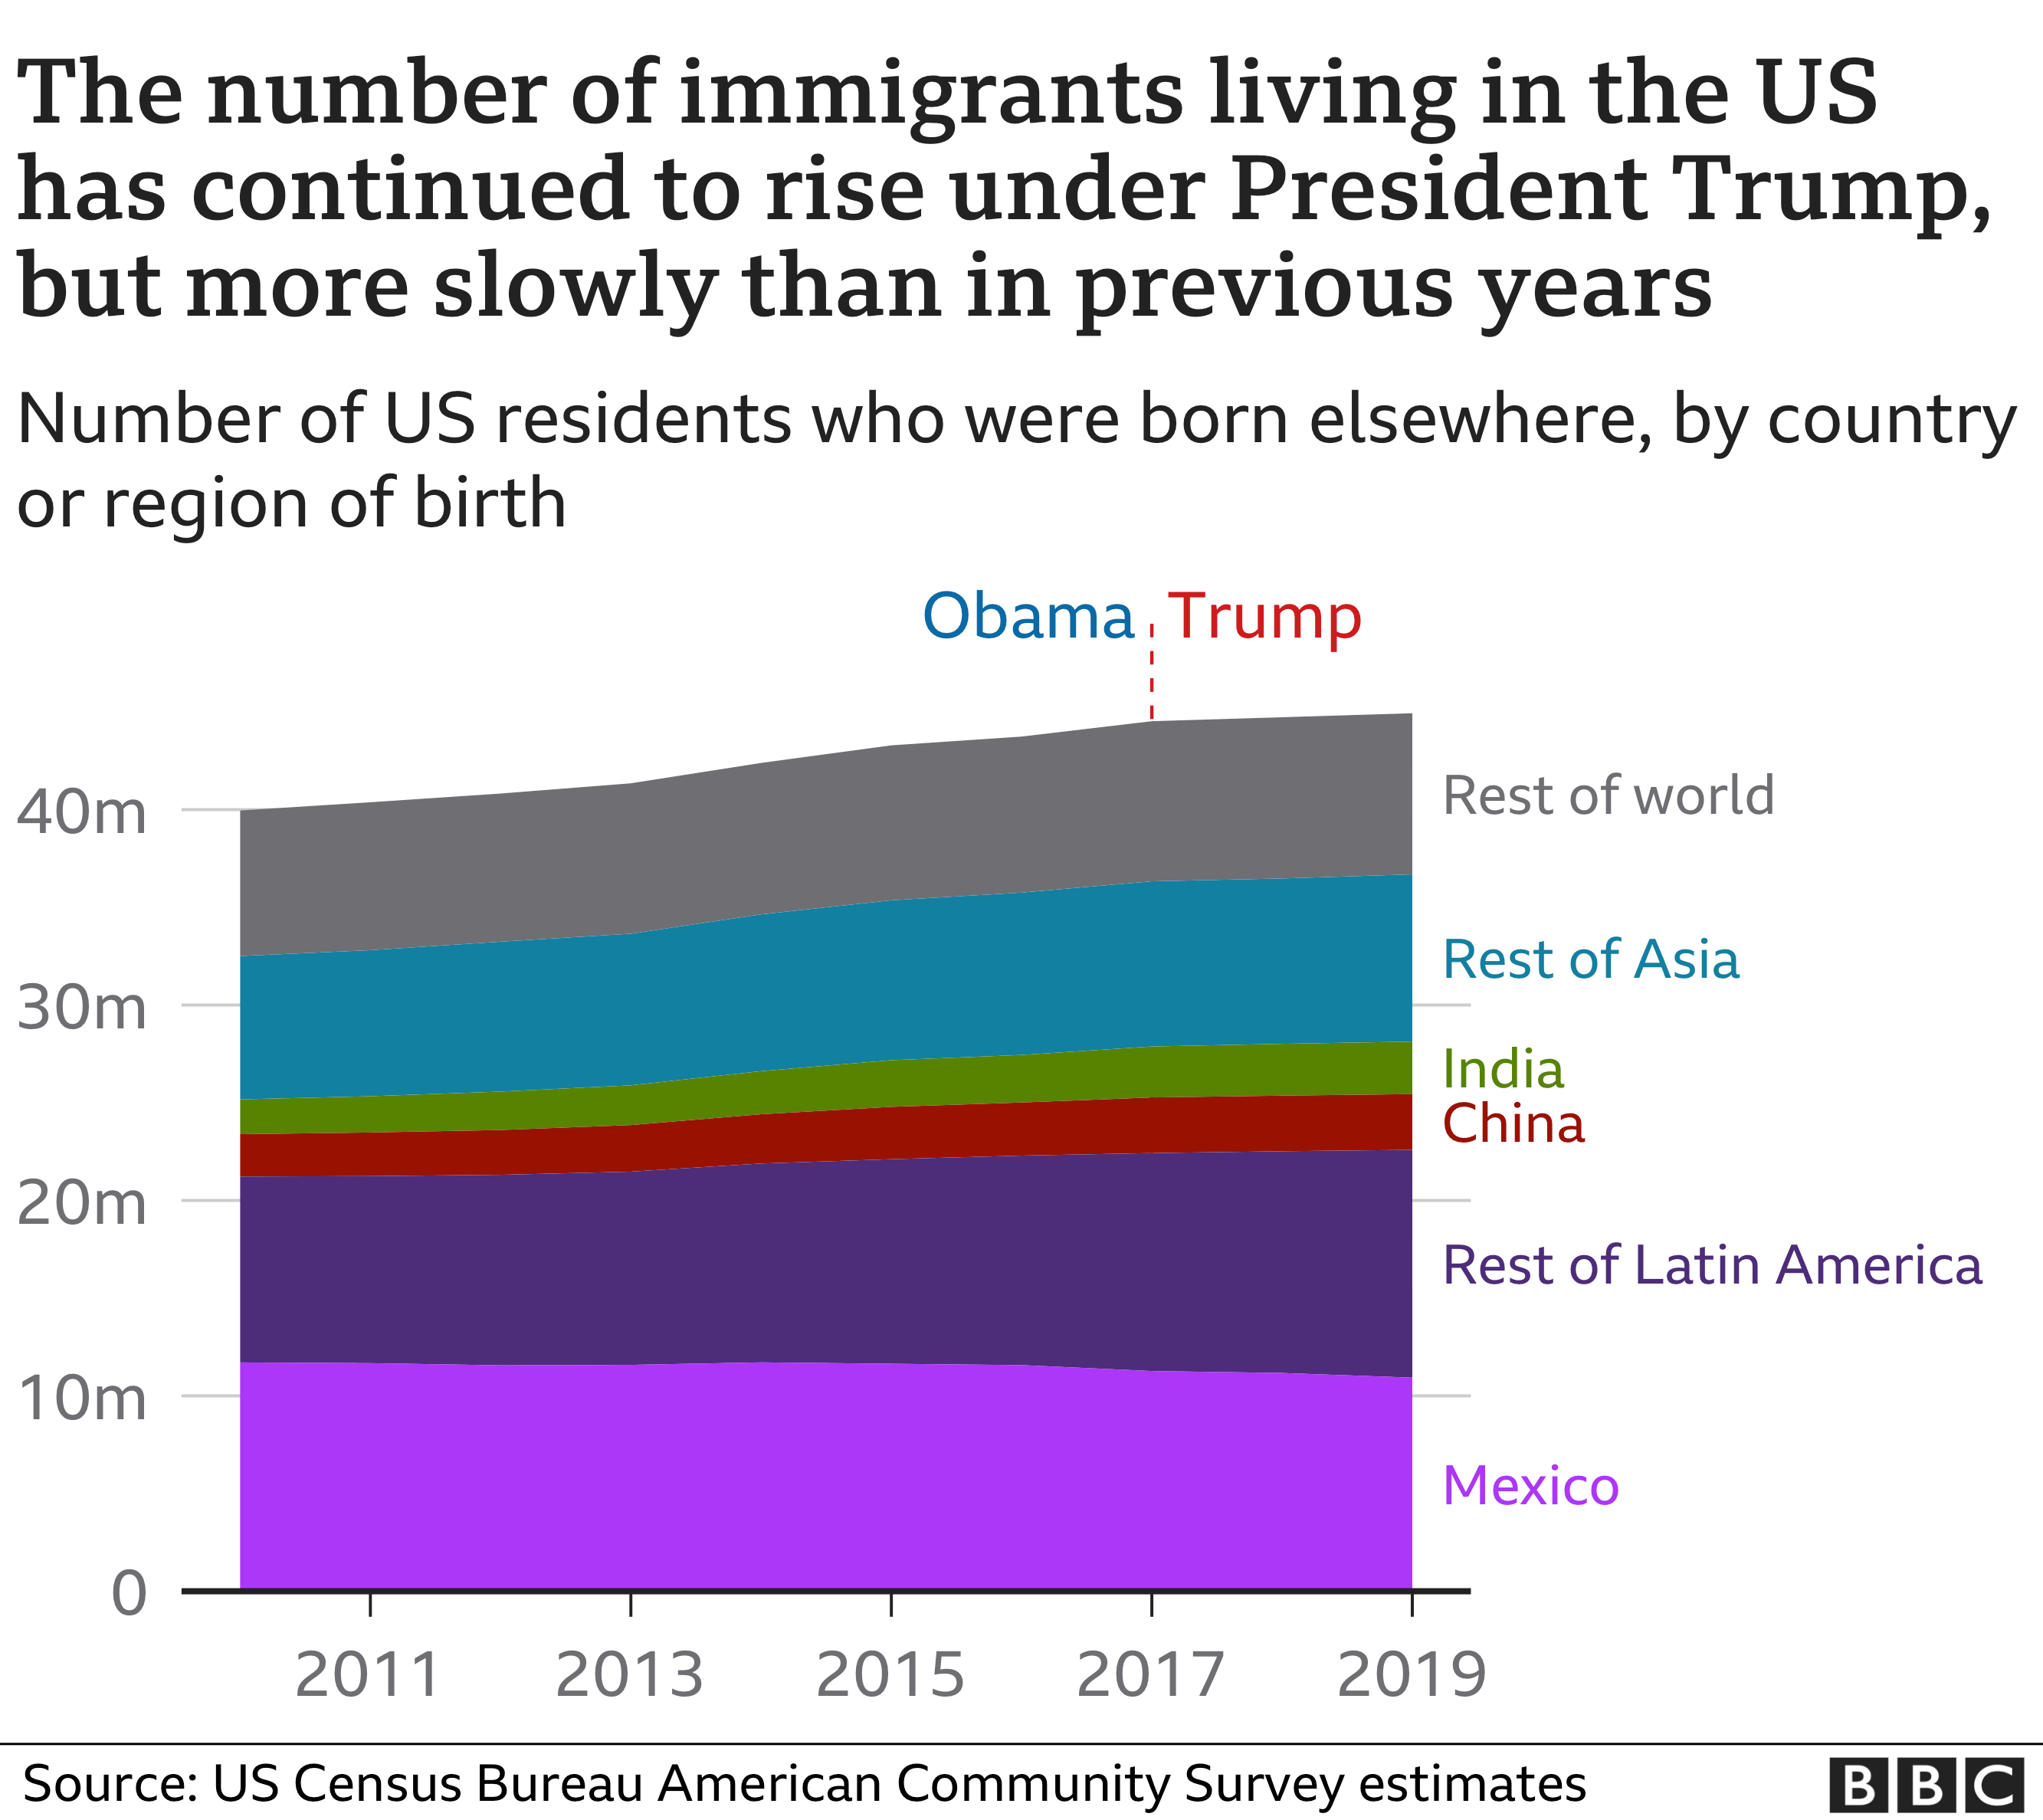 The number of immigrants living in the US has continued to rise under President Trump, but more slowly than in previous years